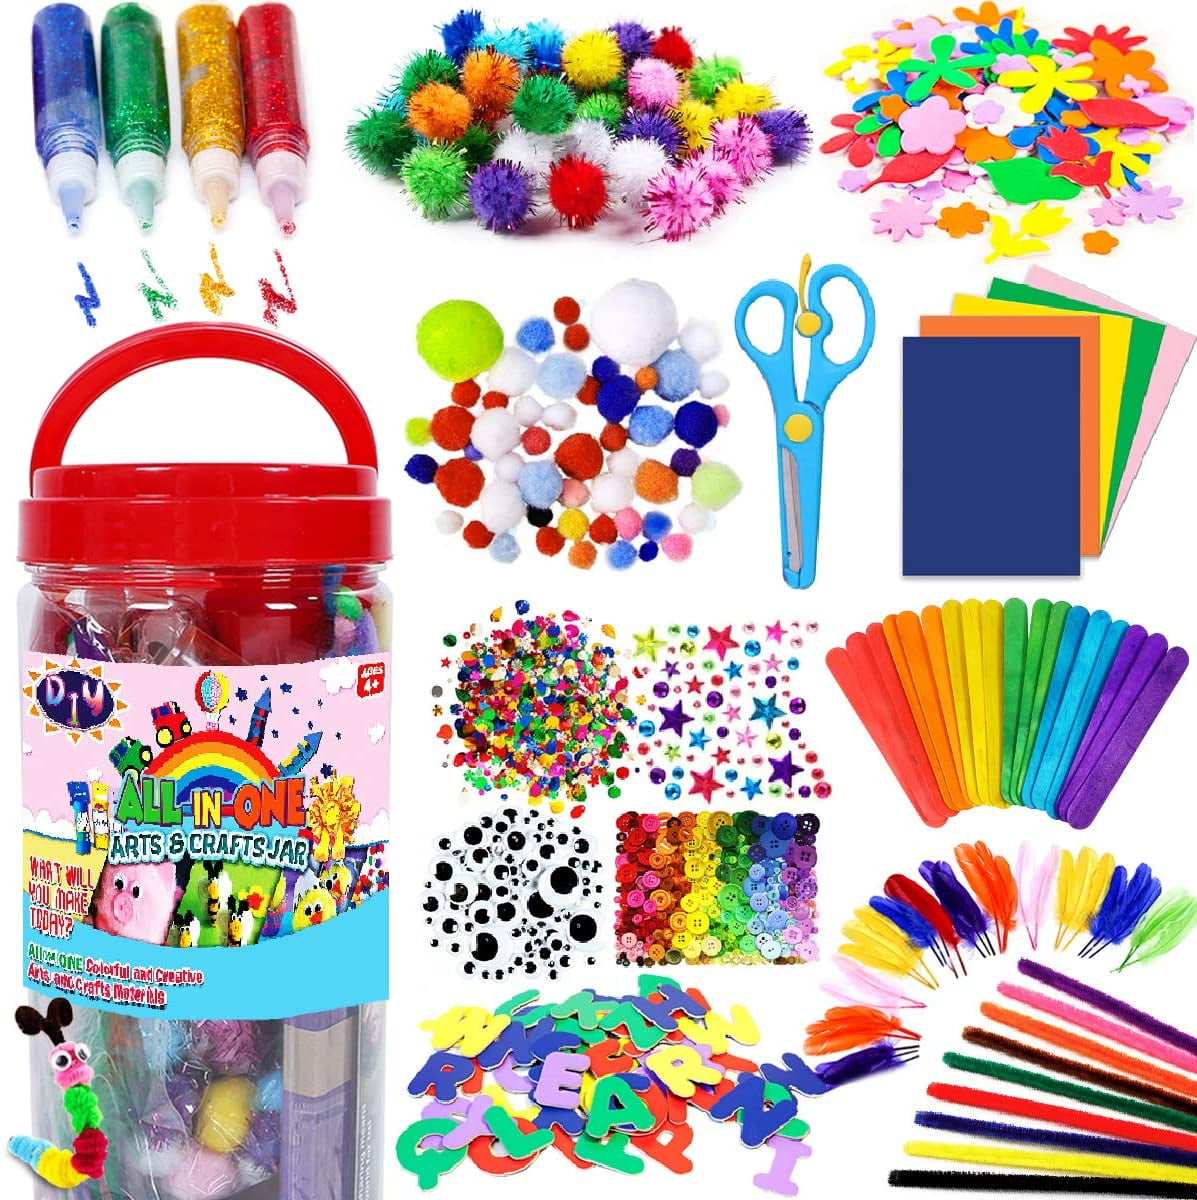 Pom Poms, Caydo Assorted Art and Craft for Kids Include Chenille Stems 